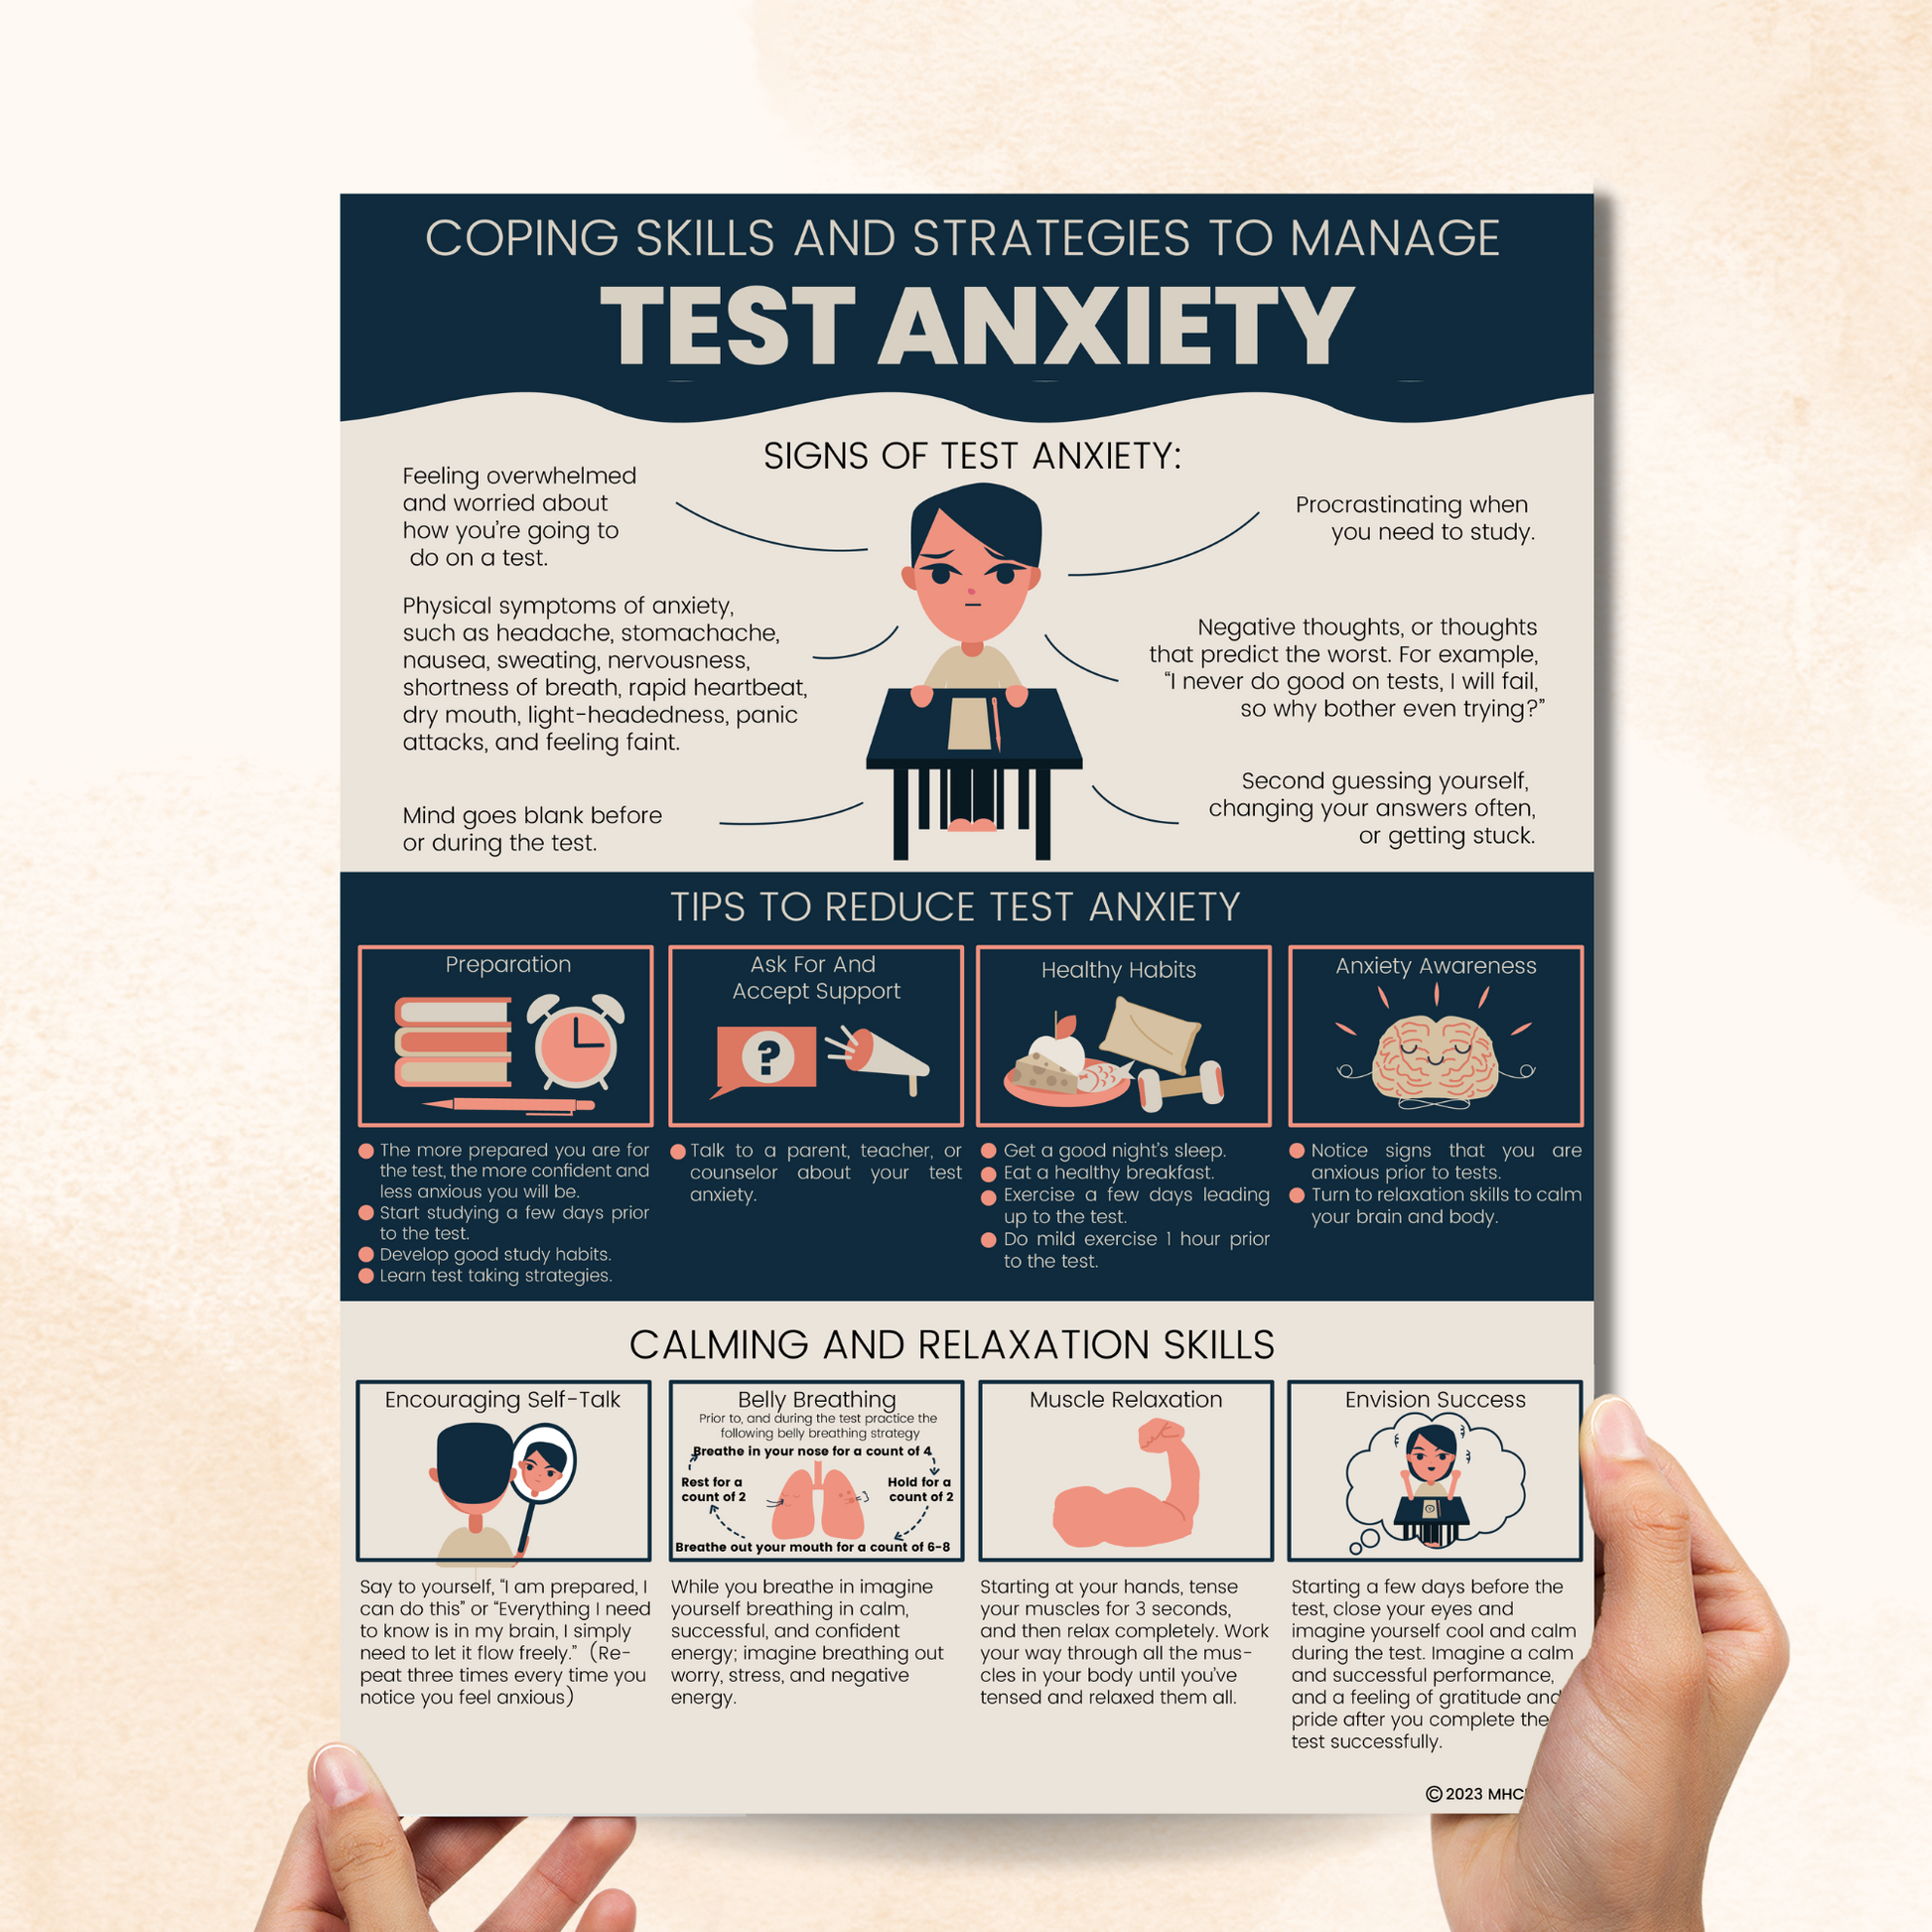 Test Anxiety Coping Skills